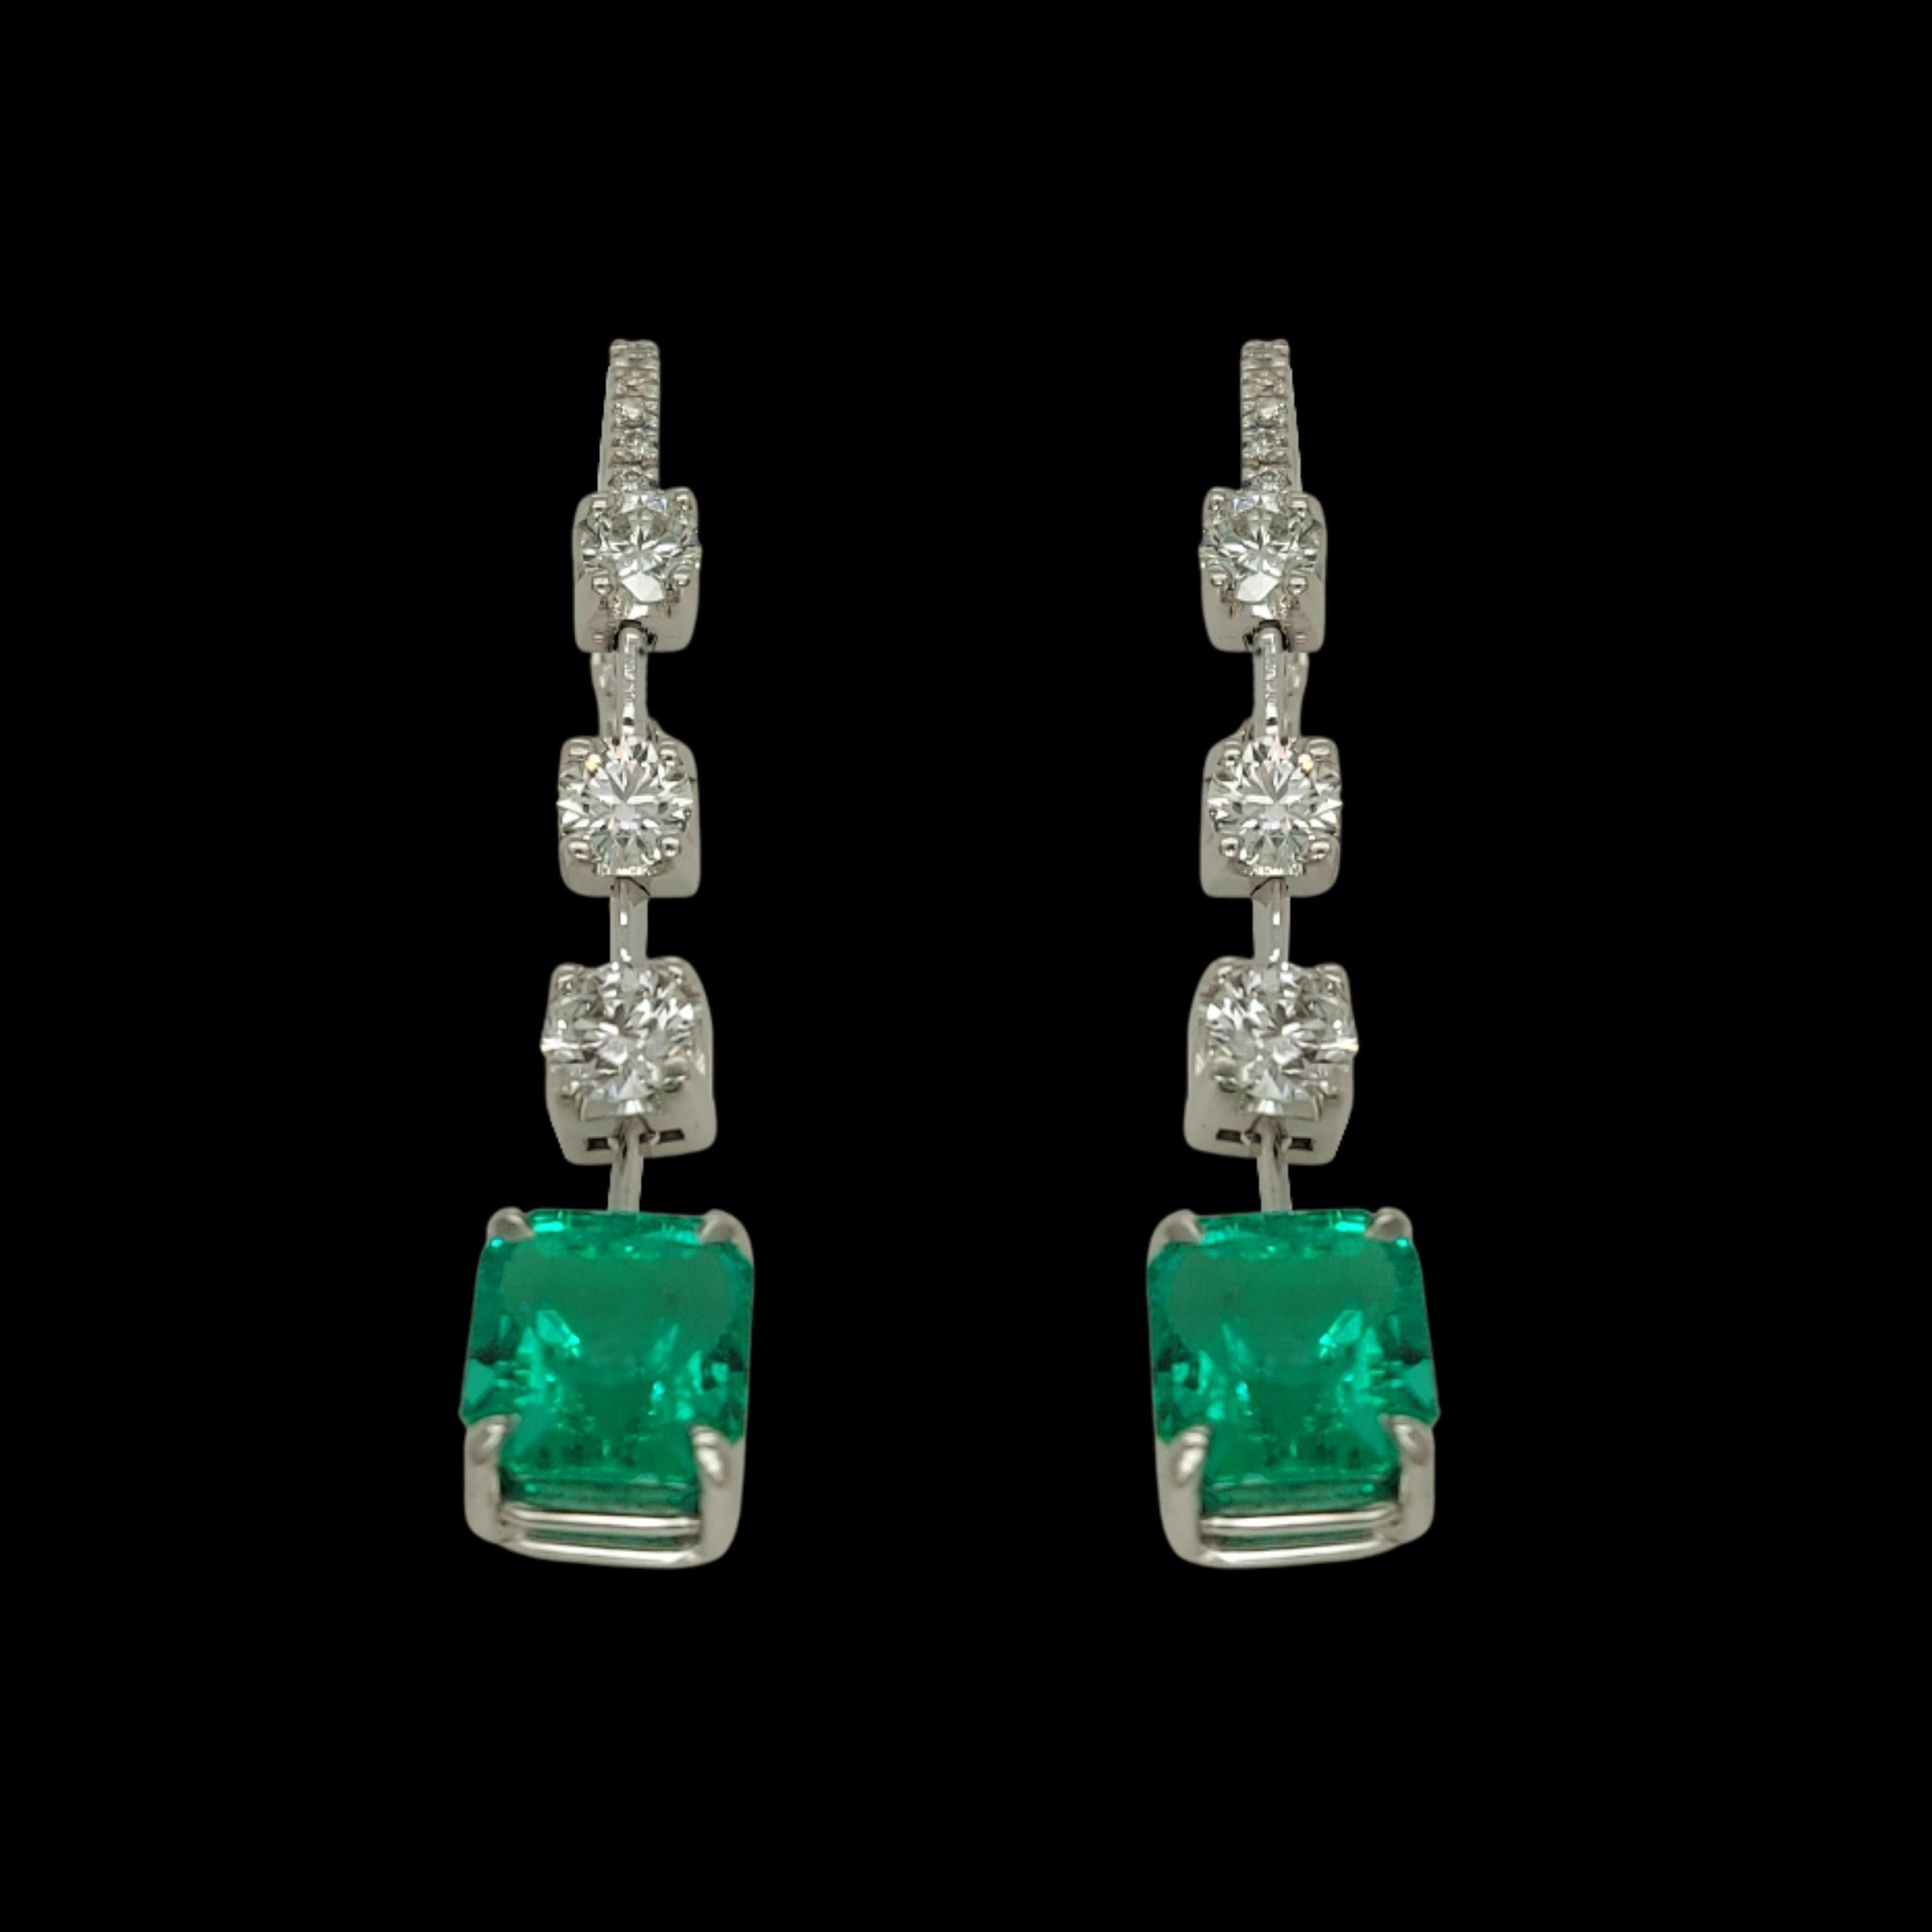 Magnificent Dangling Earrings with 5.29ct Colombian Emerald, 1.51ct Diamonds For Sale 9